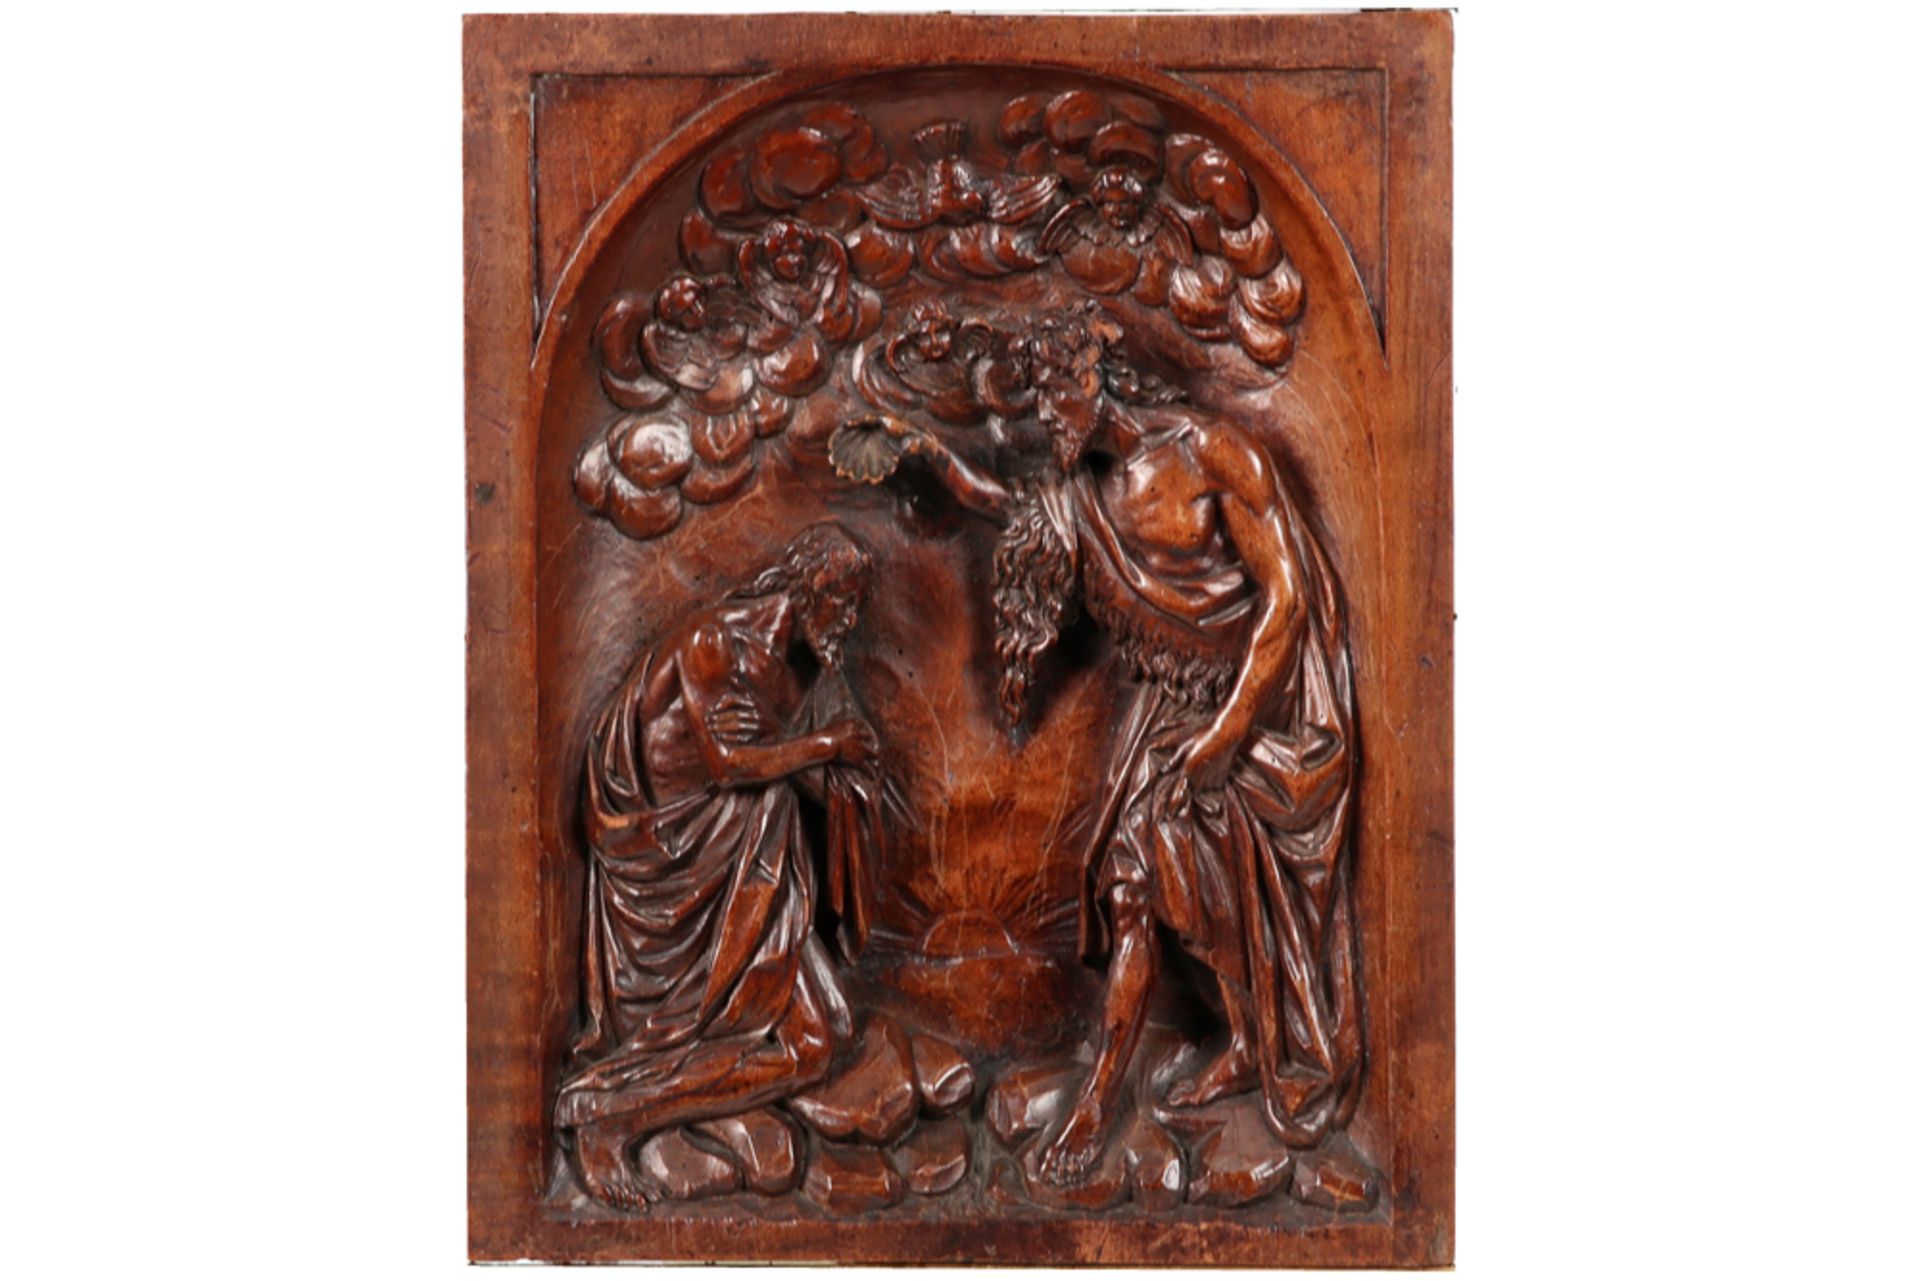 17th Cent. basrelief in fruitwood with a finely sculpted biblical scene with the Baptism of Jesus || - Image 2 of 3